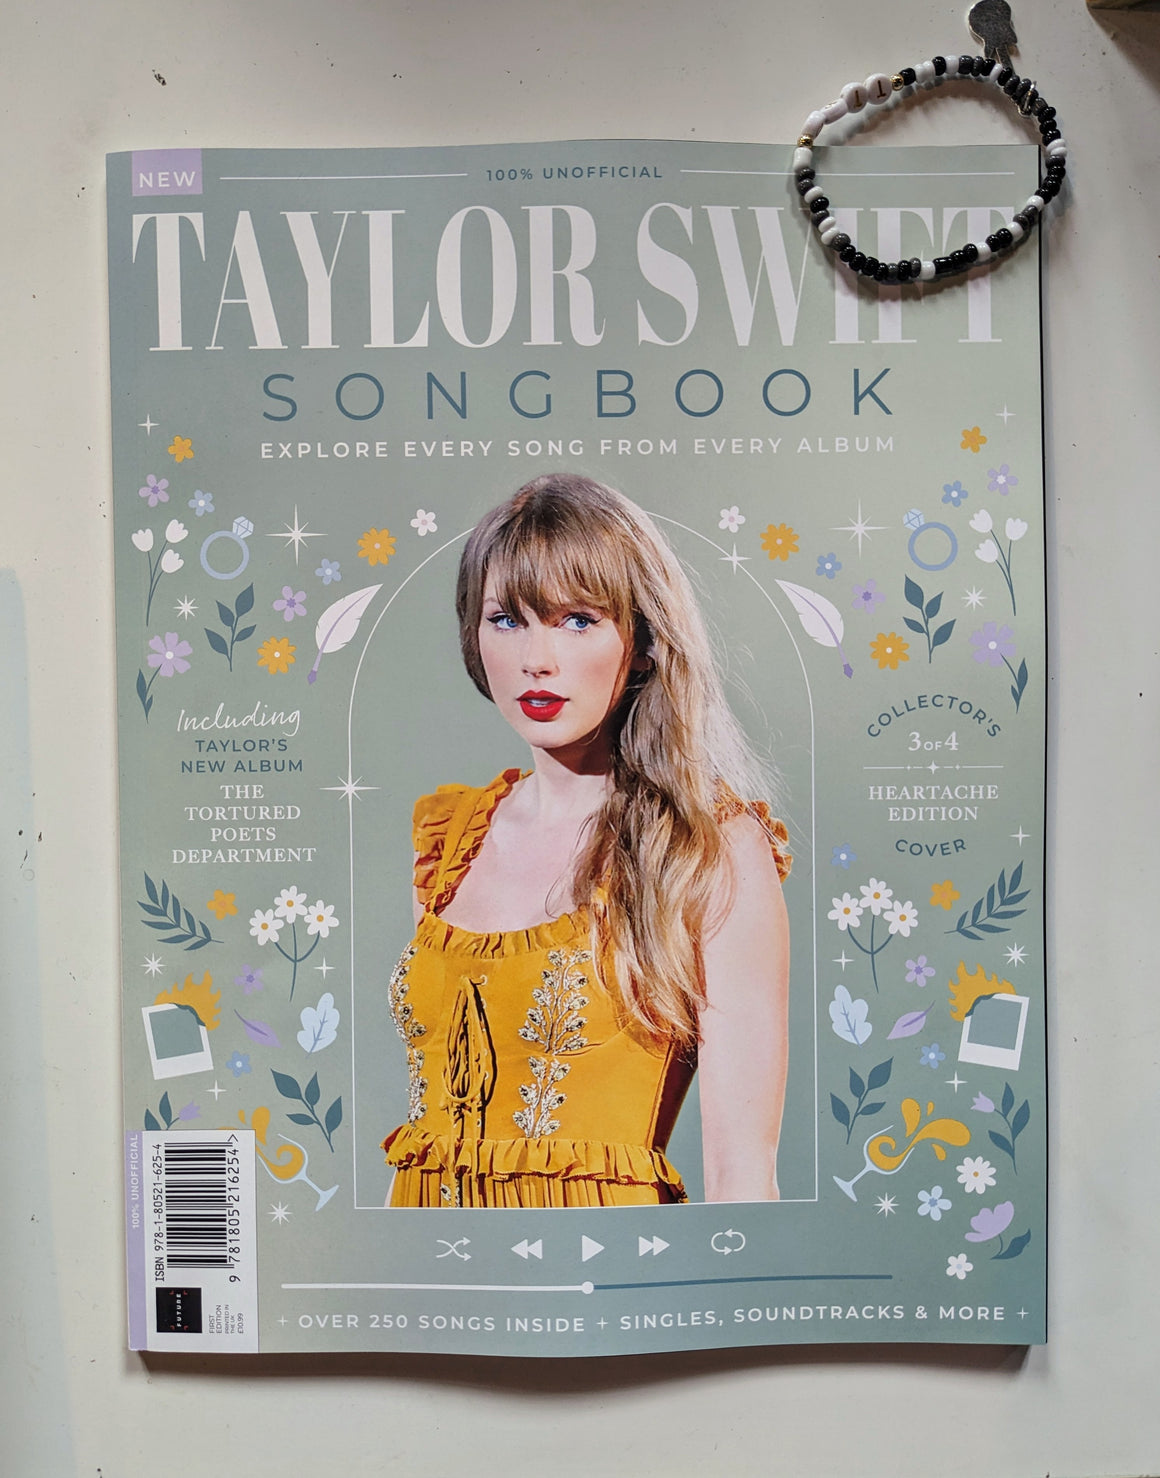 The Taylor Swift Songbook Cover #3